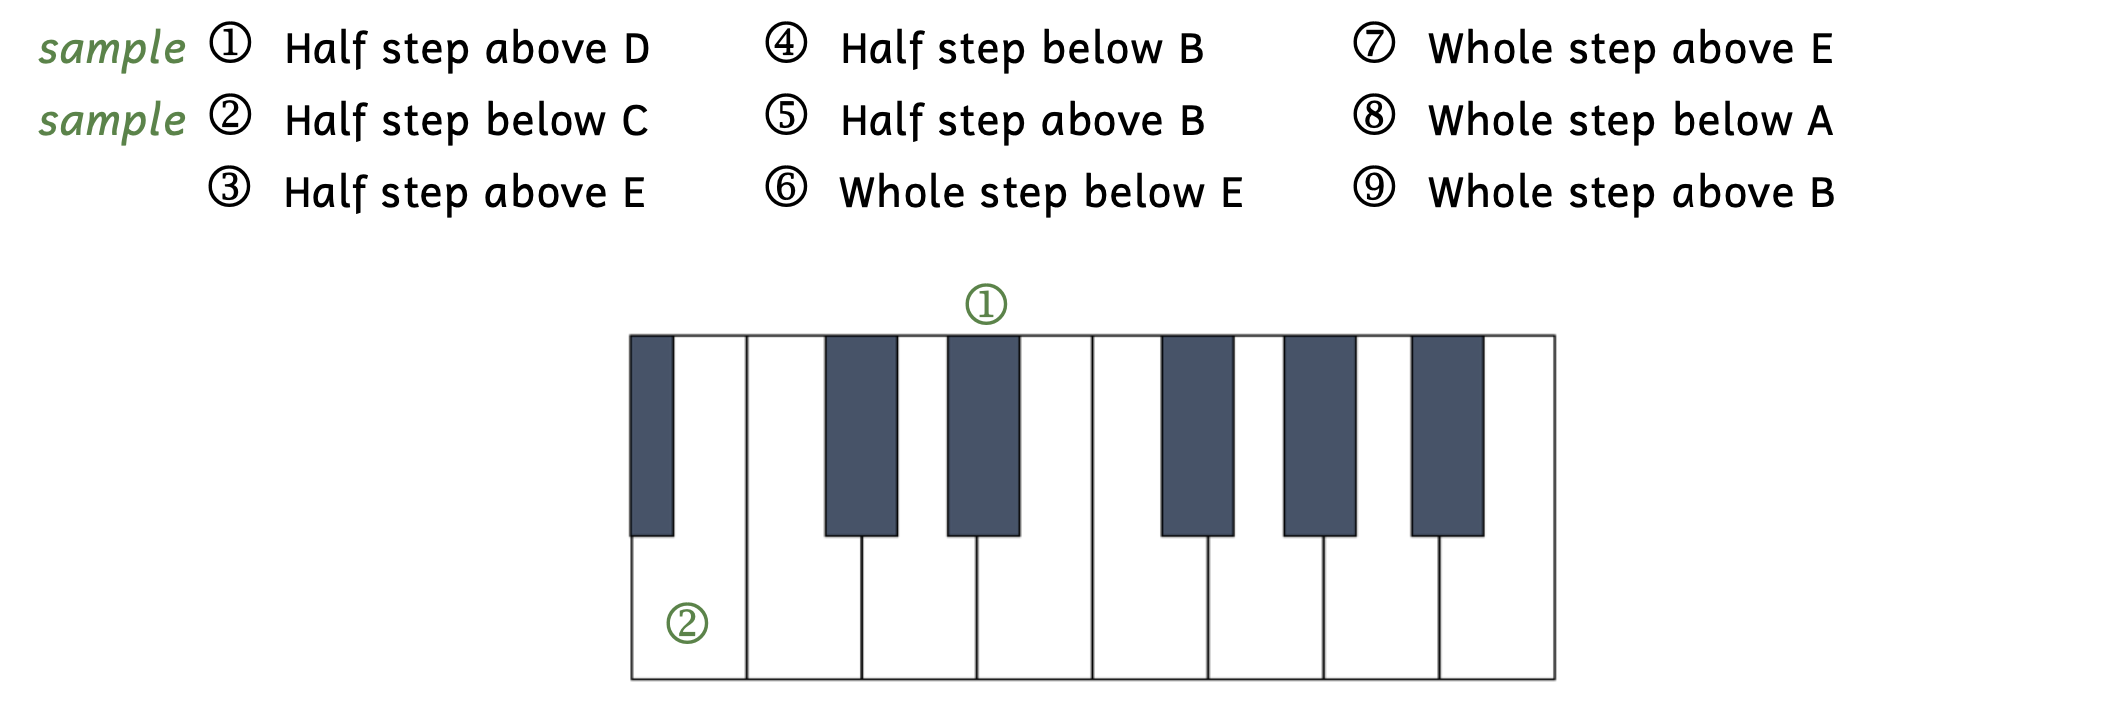 Exercise asking to label where half steps and whole steps are on a keyboard. Number 1 is the first sample. It asks for a half step above D. The number 1 is written above the black key to the right of D. Number 2 is the second sample. It asks for a half step below C. The number 2 is written on the white key that is B. Number 3 asks for a half step above E. Number 4 asks for a half step below B. Number 5 asks for a half step above B. Number 6 asks for a whole step below E. Number 7 asks for a whole step above E. Number 8 asks for a whole step below A. Number 9 asks for a whole step above B.